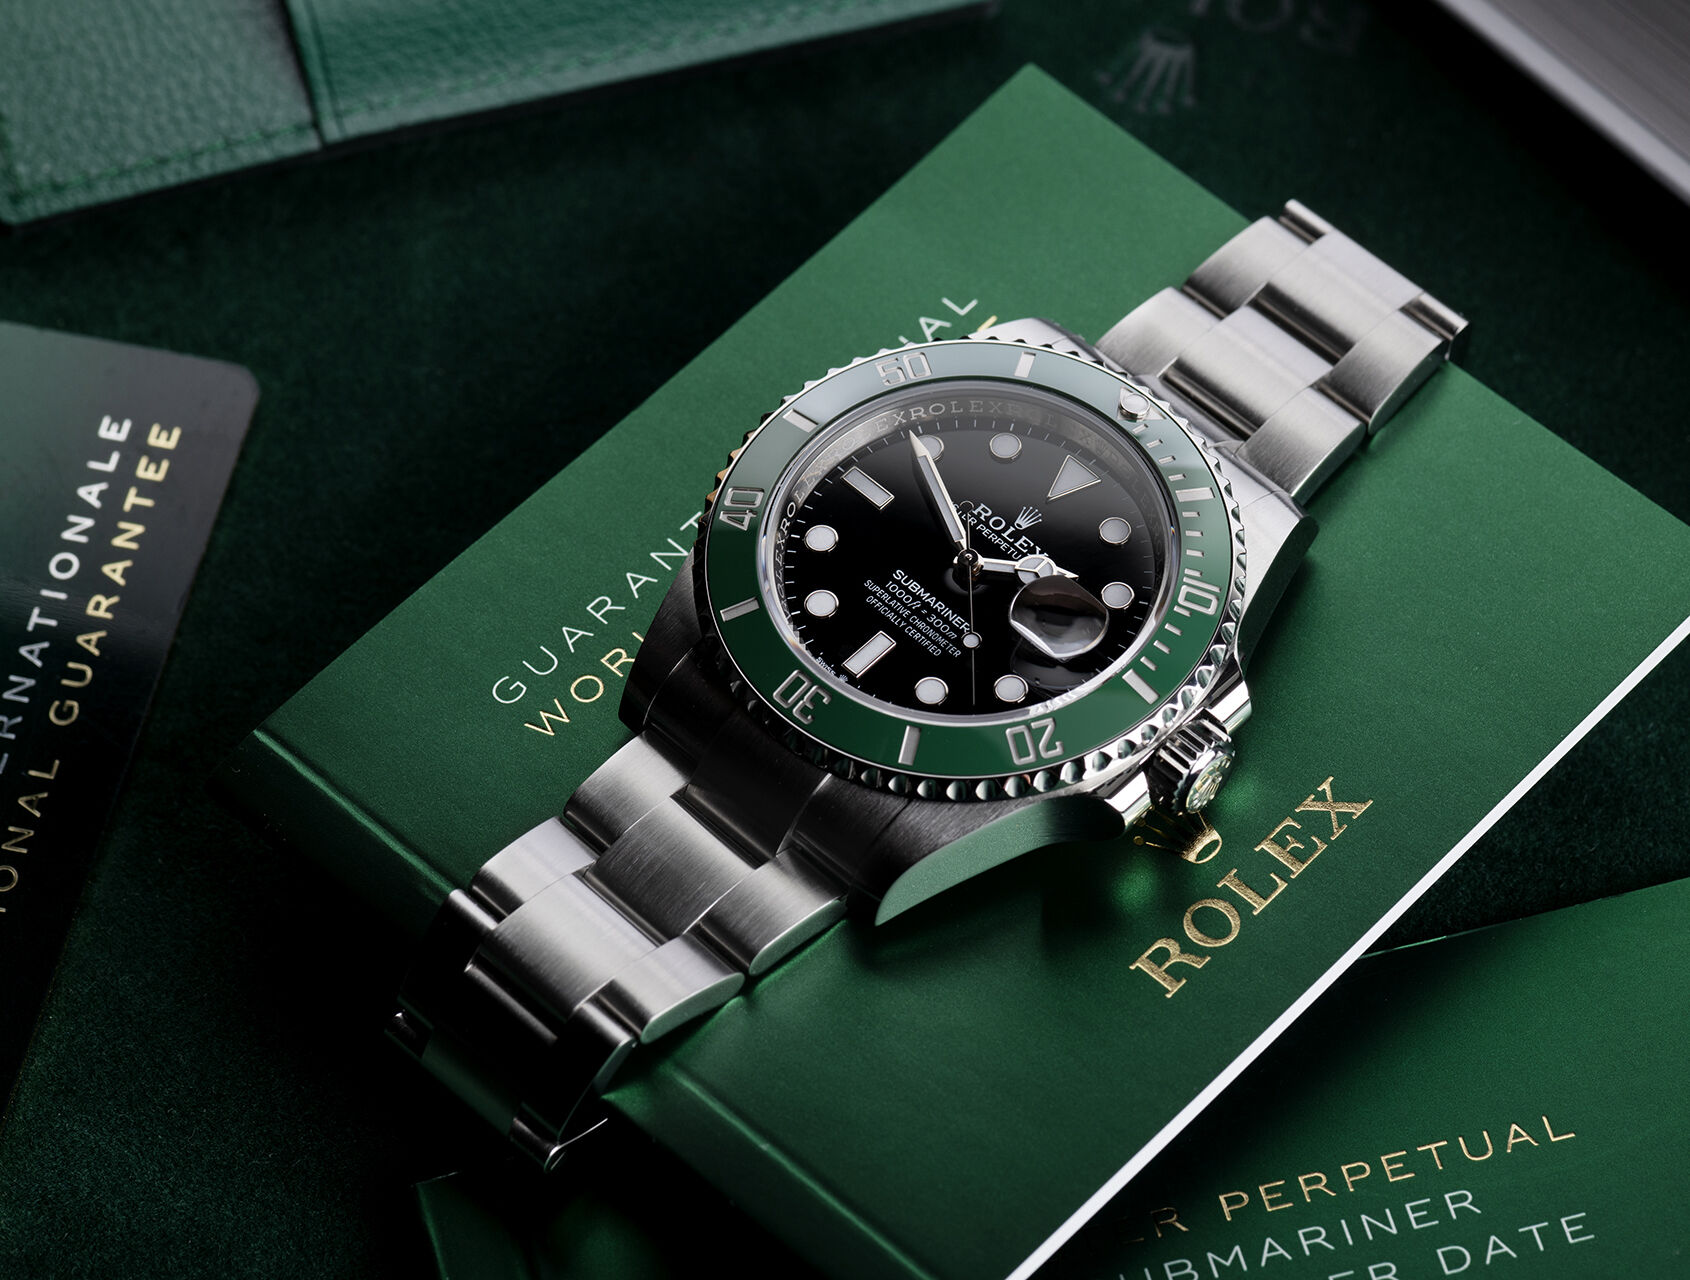 ref 126610LV | 126610LV - Box & Papers | Rolex Submariner Date